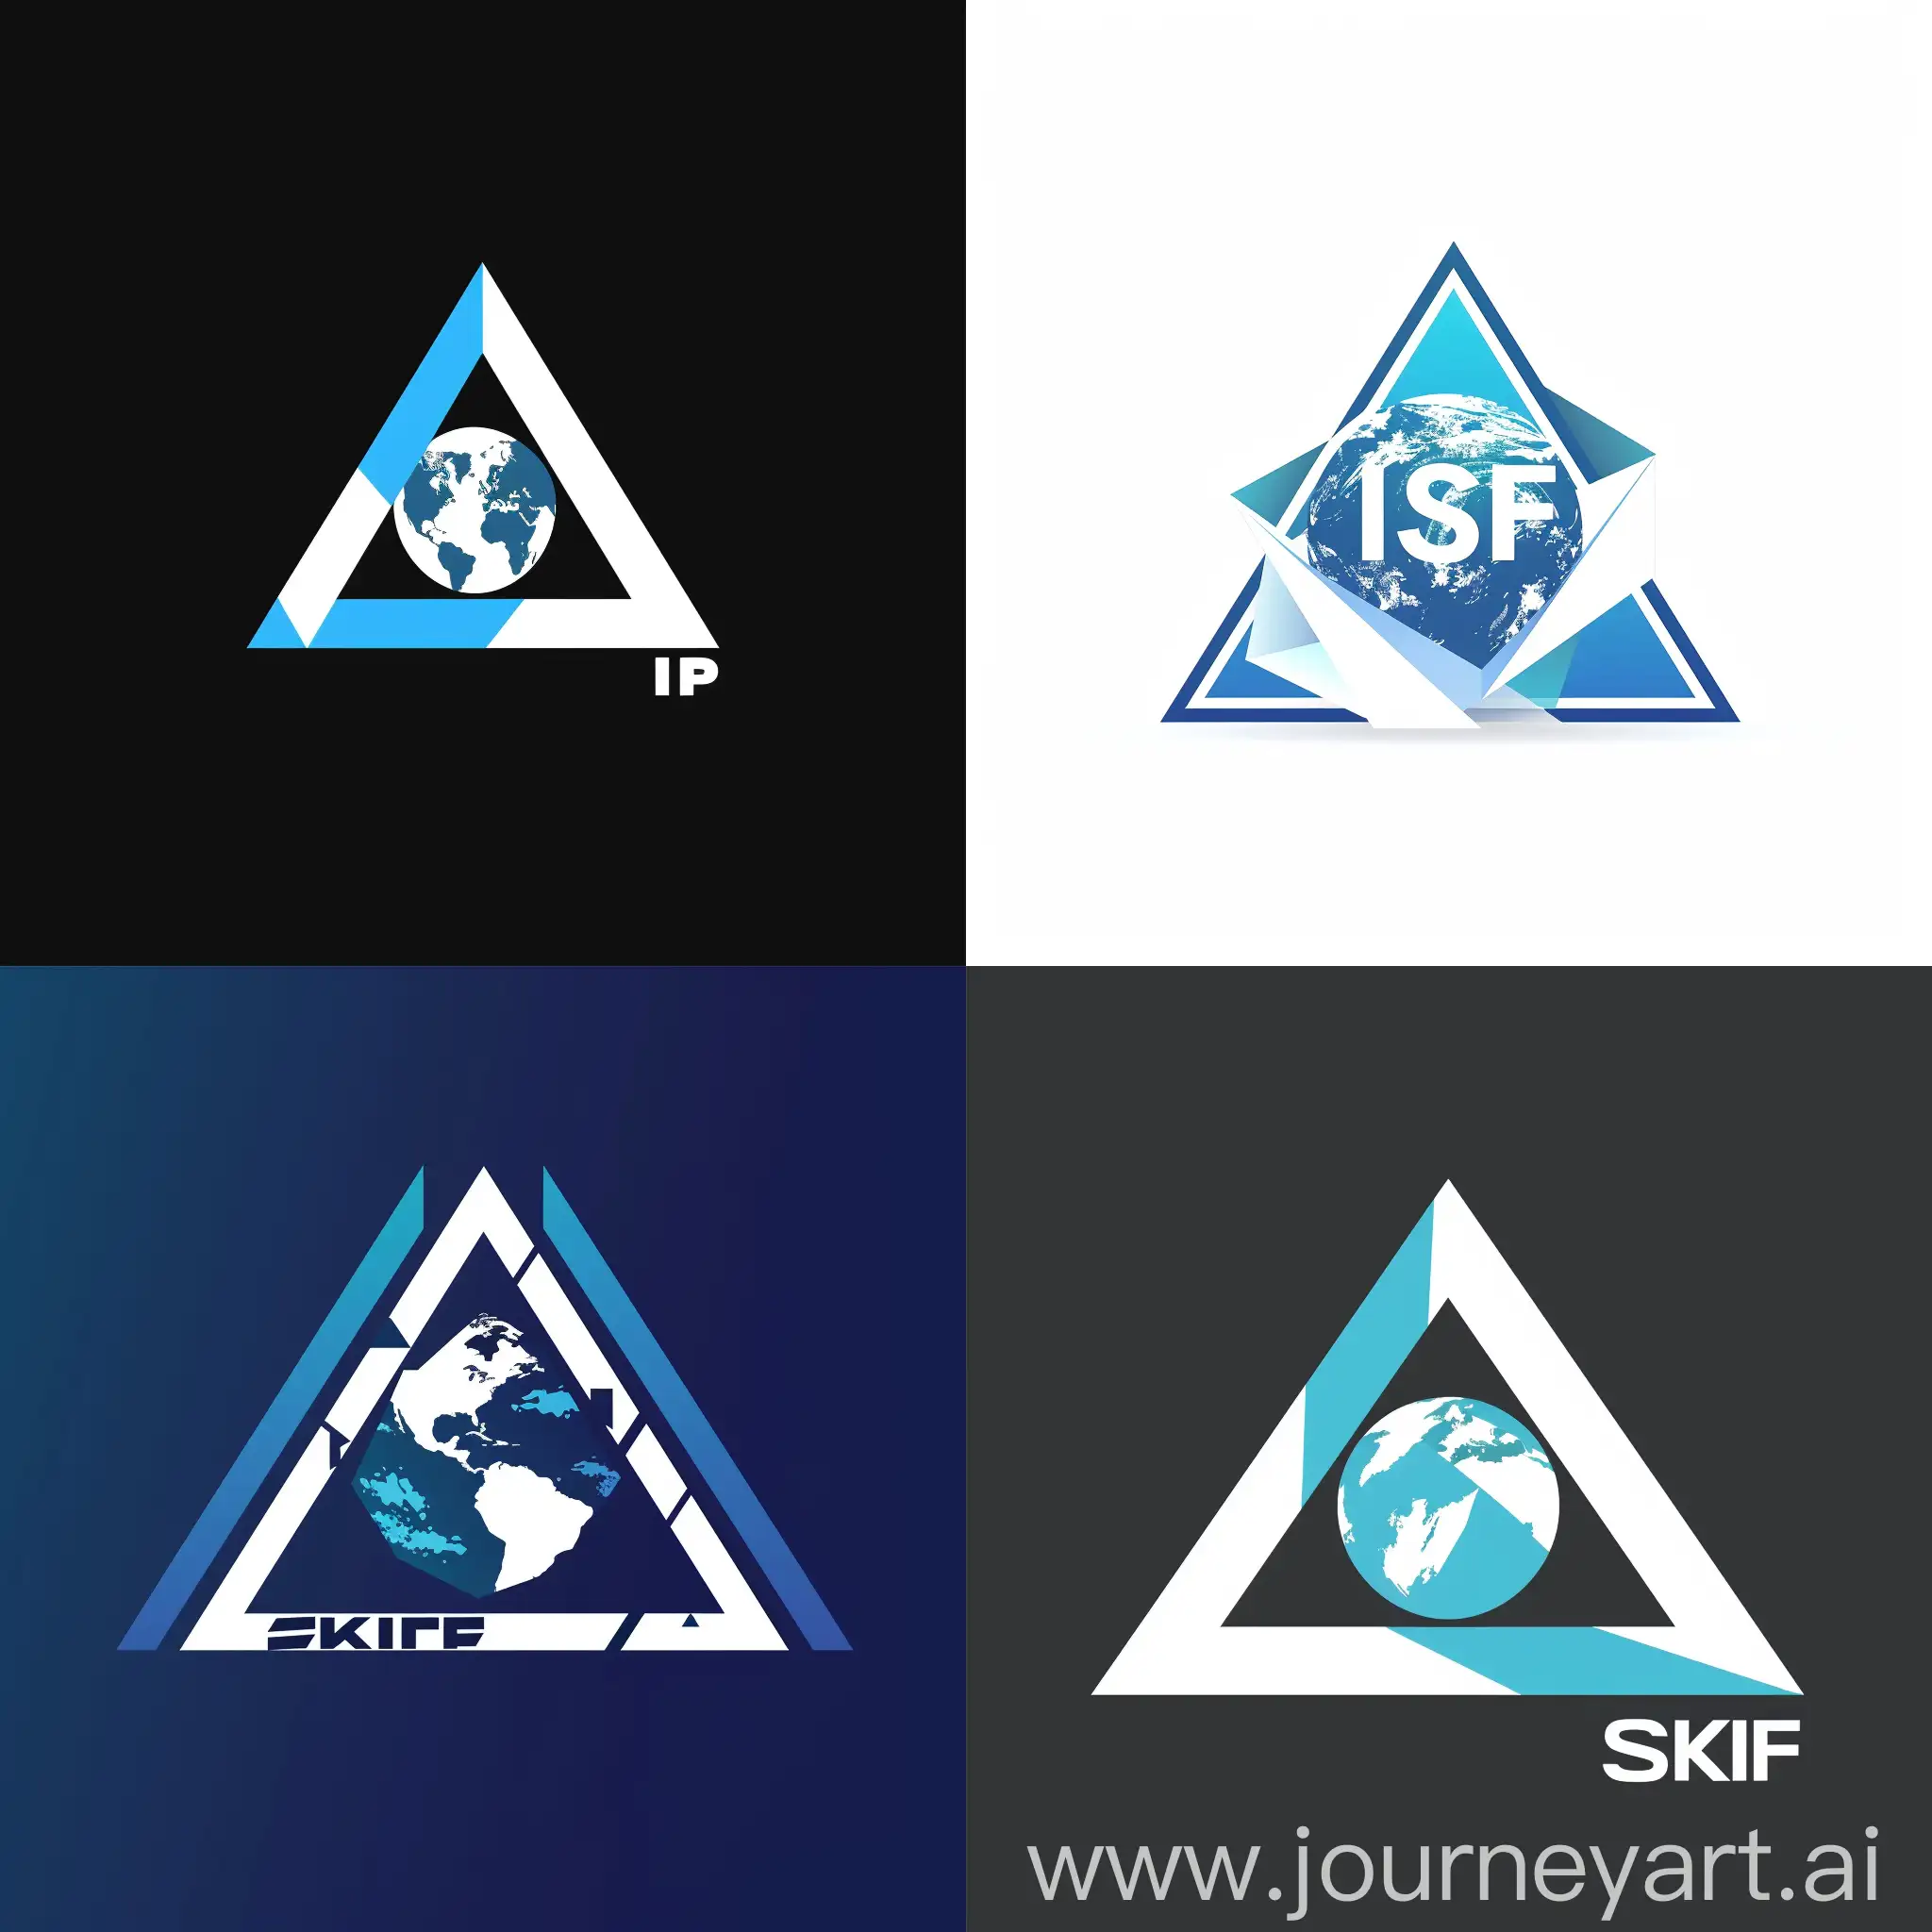 logo for it-company named is "SKIF", triangle with globe inside, white and blue colors